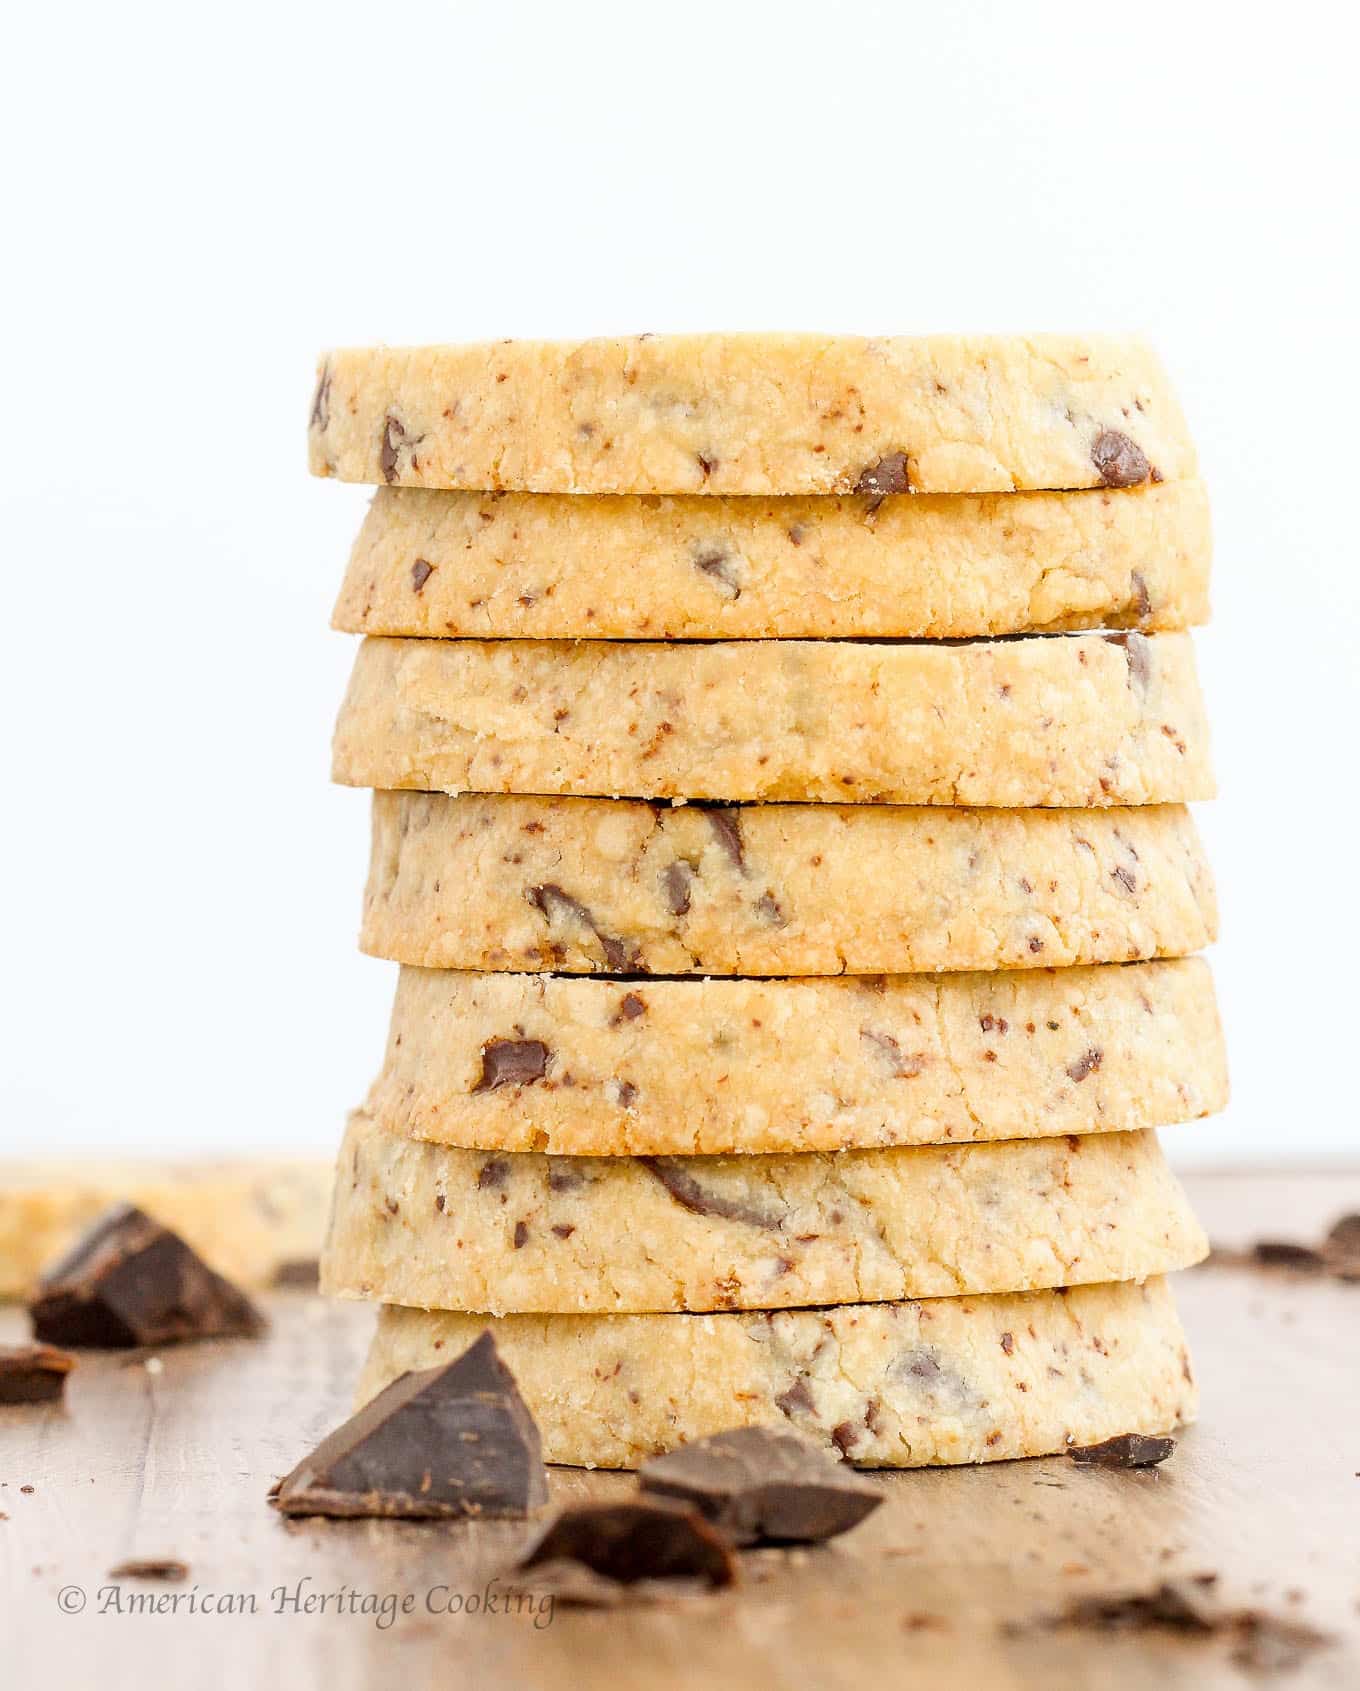 These Chocolate Chip Shortbread Cookies magically have texture of a classic shortbread cookie while remaining soft and moist. A sweet brown sugar, vanilla dough is marbled with semi-sweet chocolate chips for a sweet treat that is perfect as dessert or with a cup of coffee! 